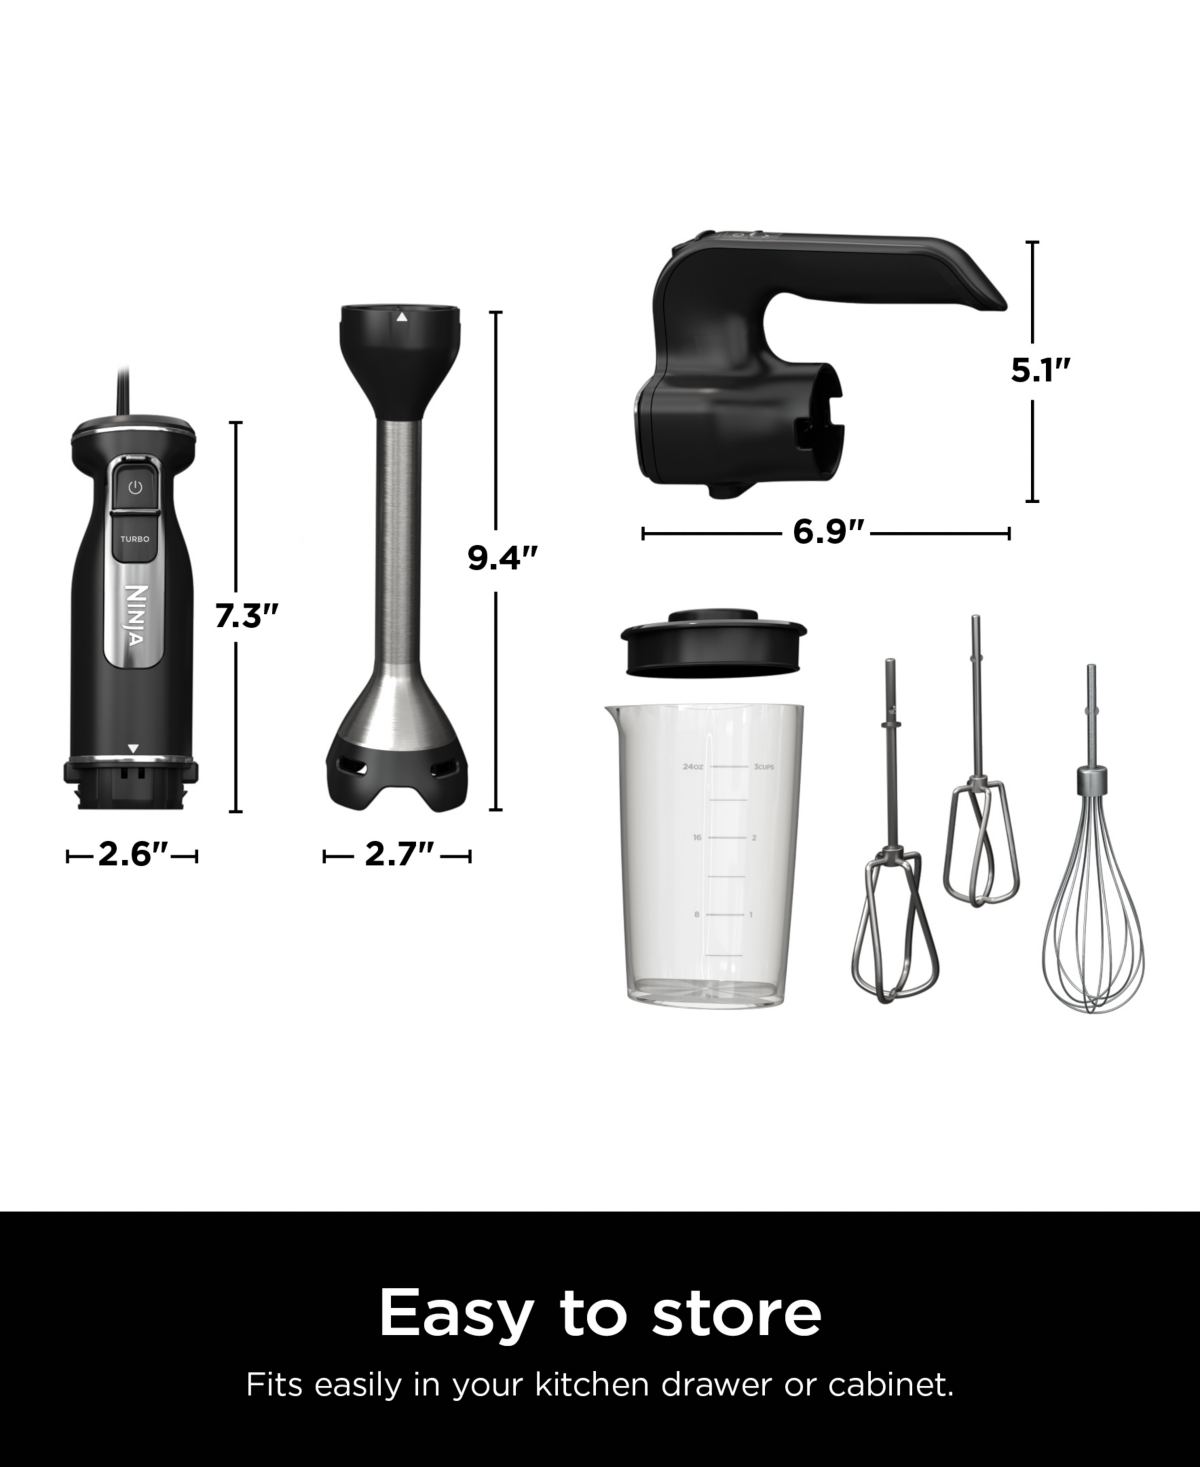 Shop Ninja Foodi Power Mixer System Immersion Blender & Hand Mixer, Ci101 In Black,stainless Steel